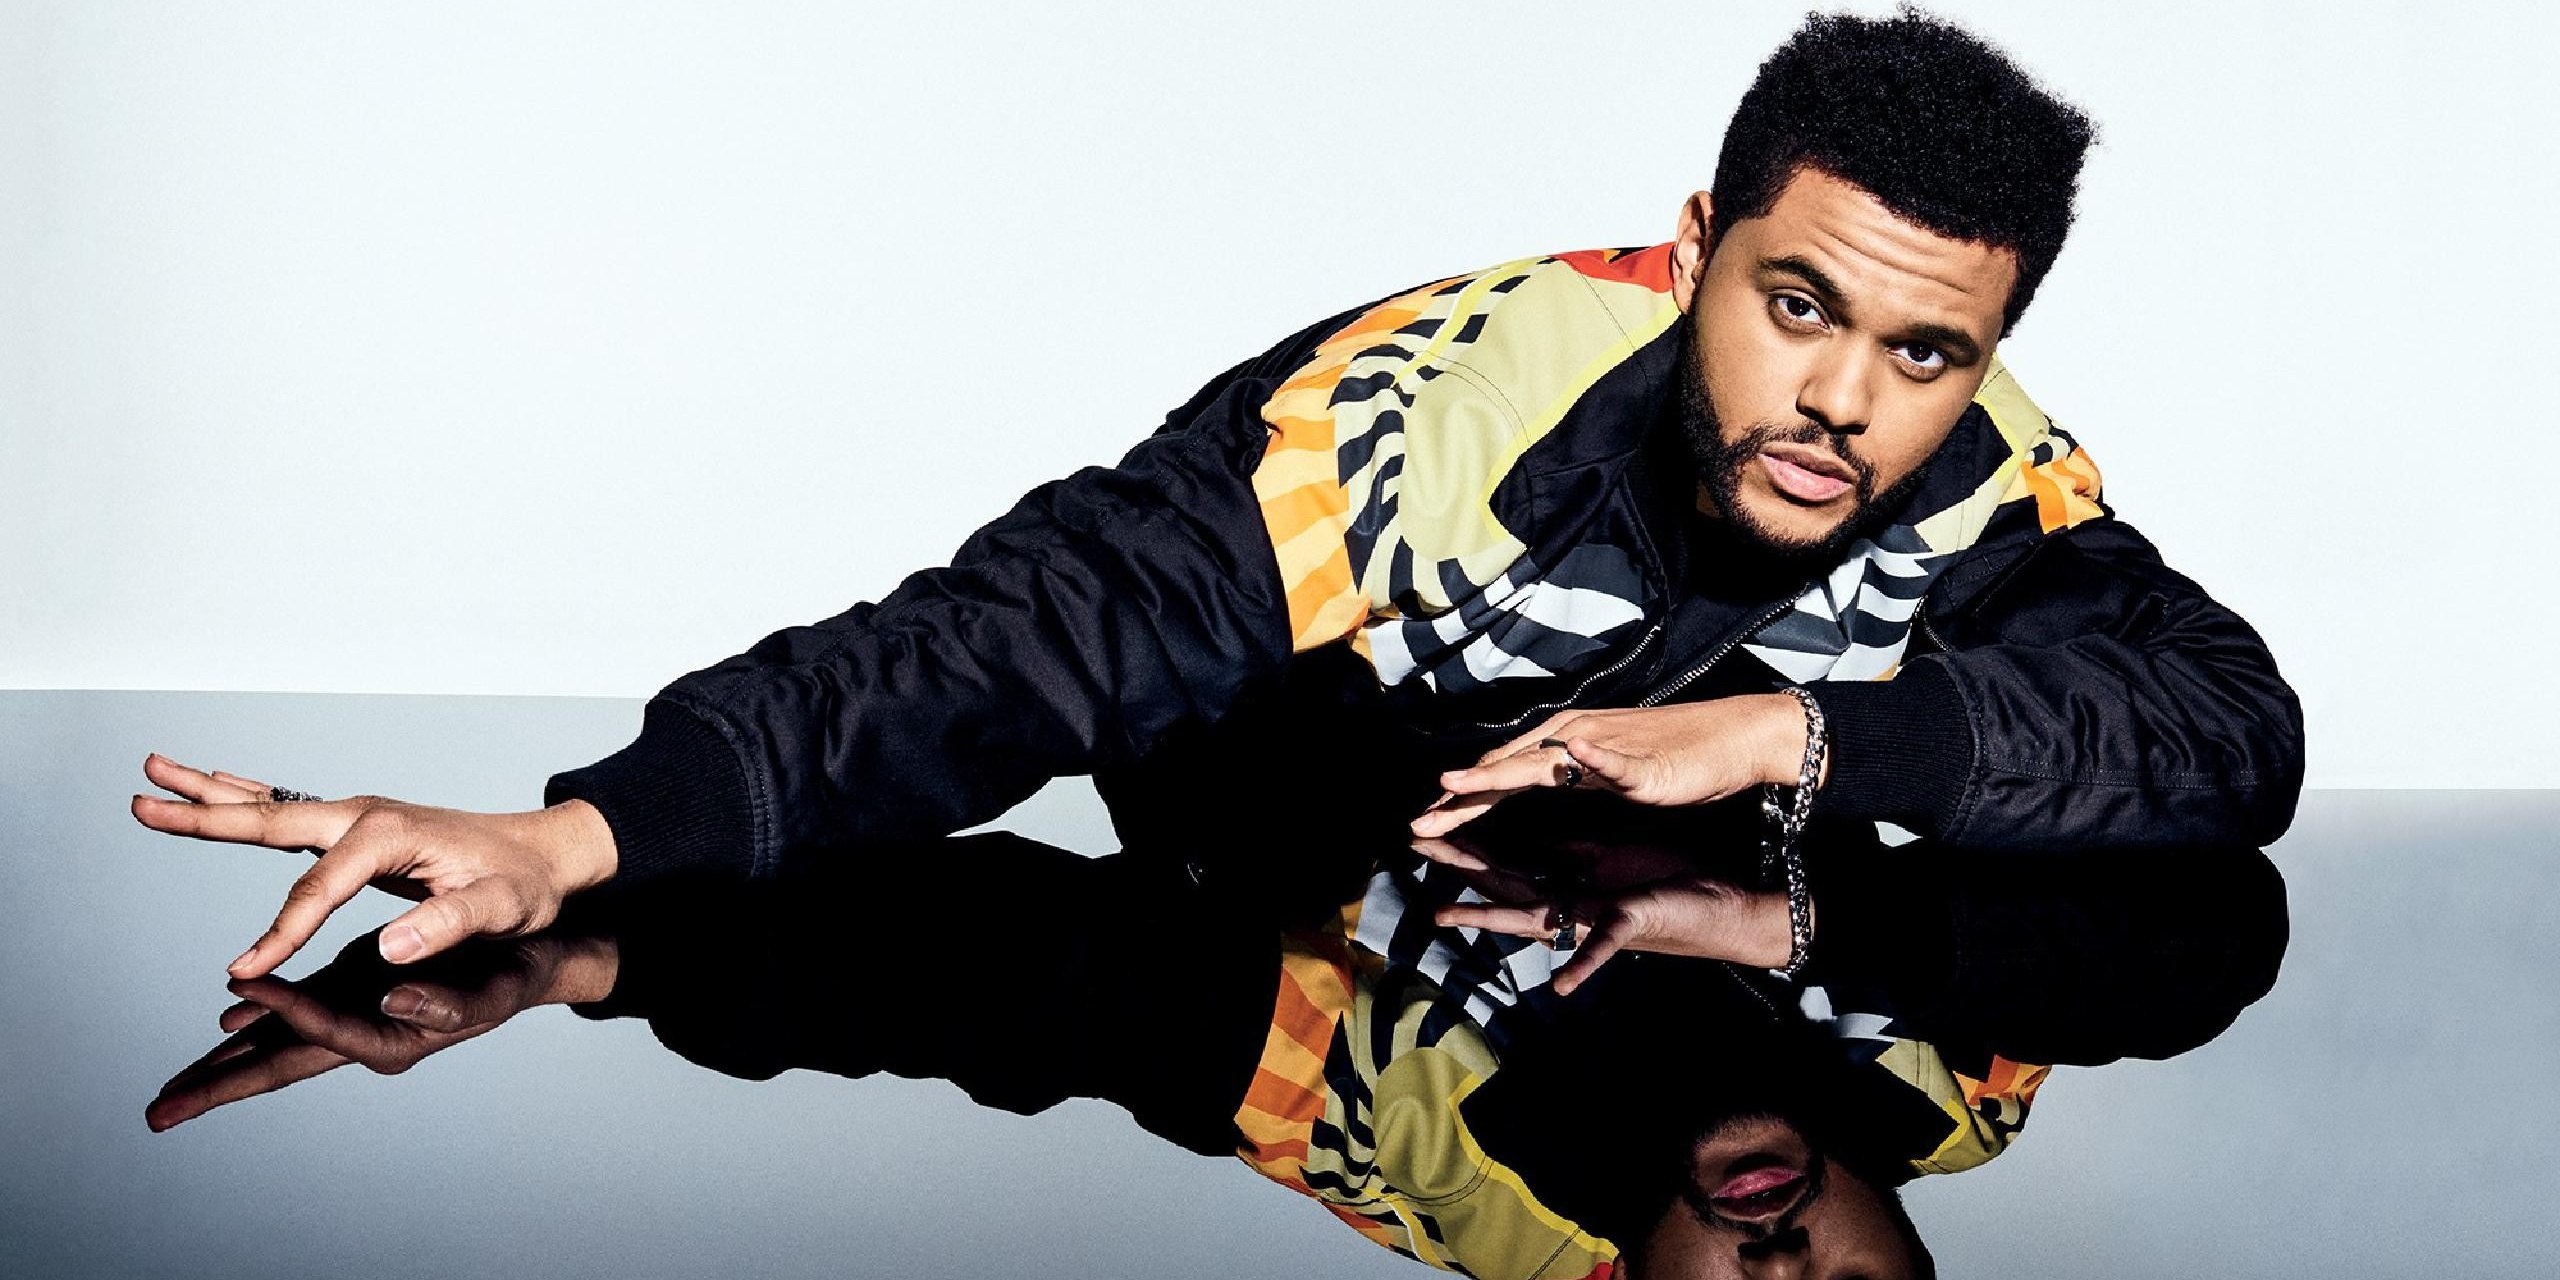 Musician The Weeknd leaning forward.